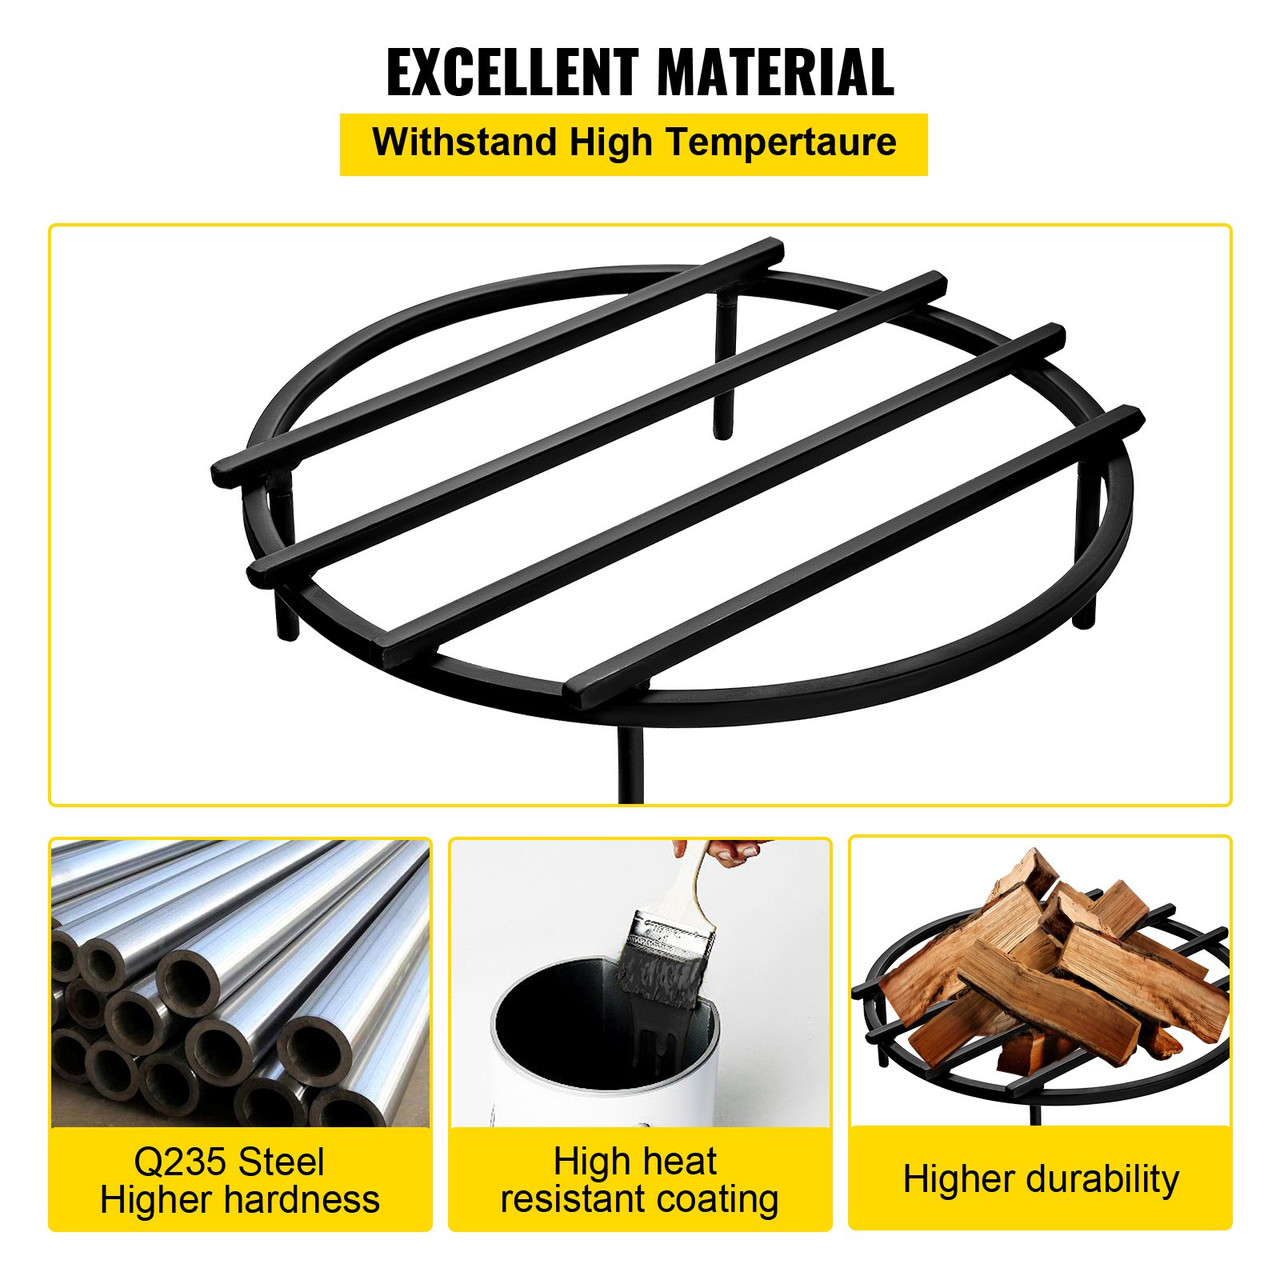 Fire Pit Grate, Heavy Duty Iron Round Firewood Grate, Round Wood Fire Pit Grate 18", Firepit Grate with Black Paint, Fire Grate with 4 Removable